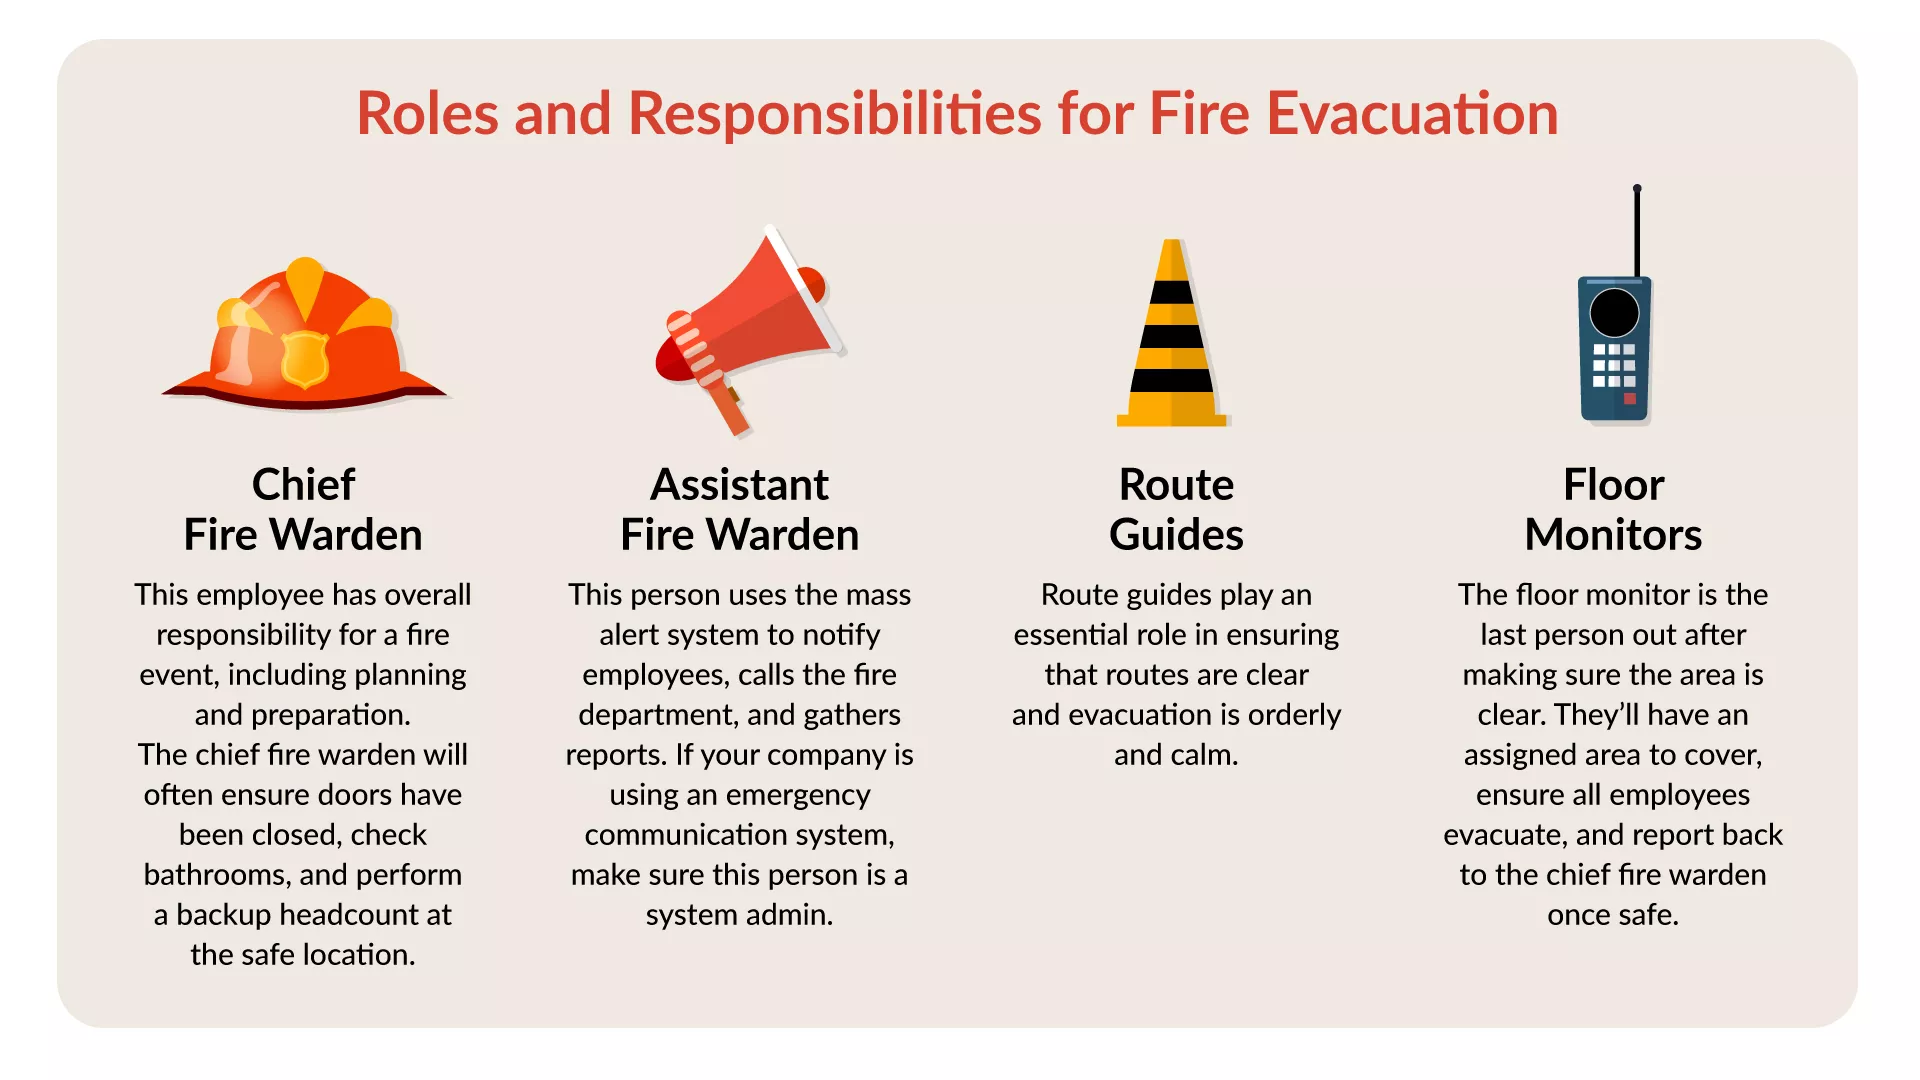 Roles and responsibilities for fire evacuation